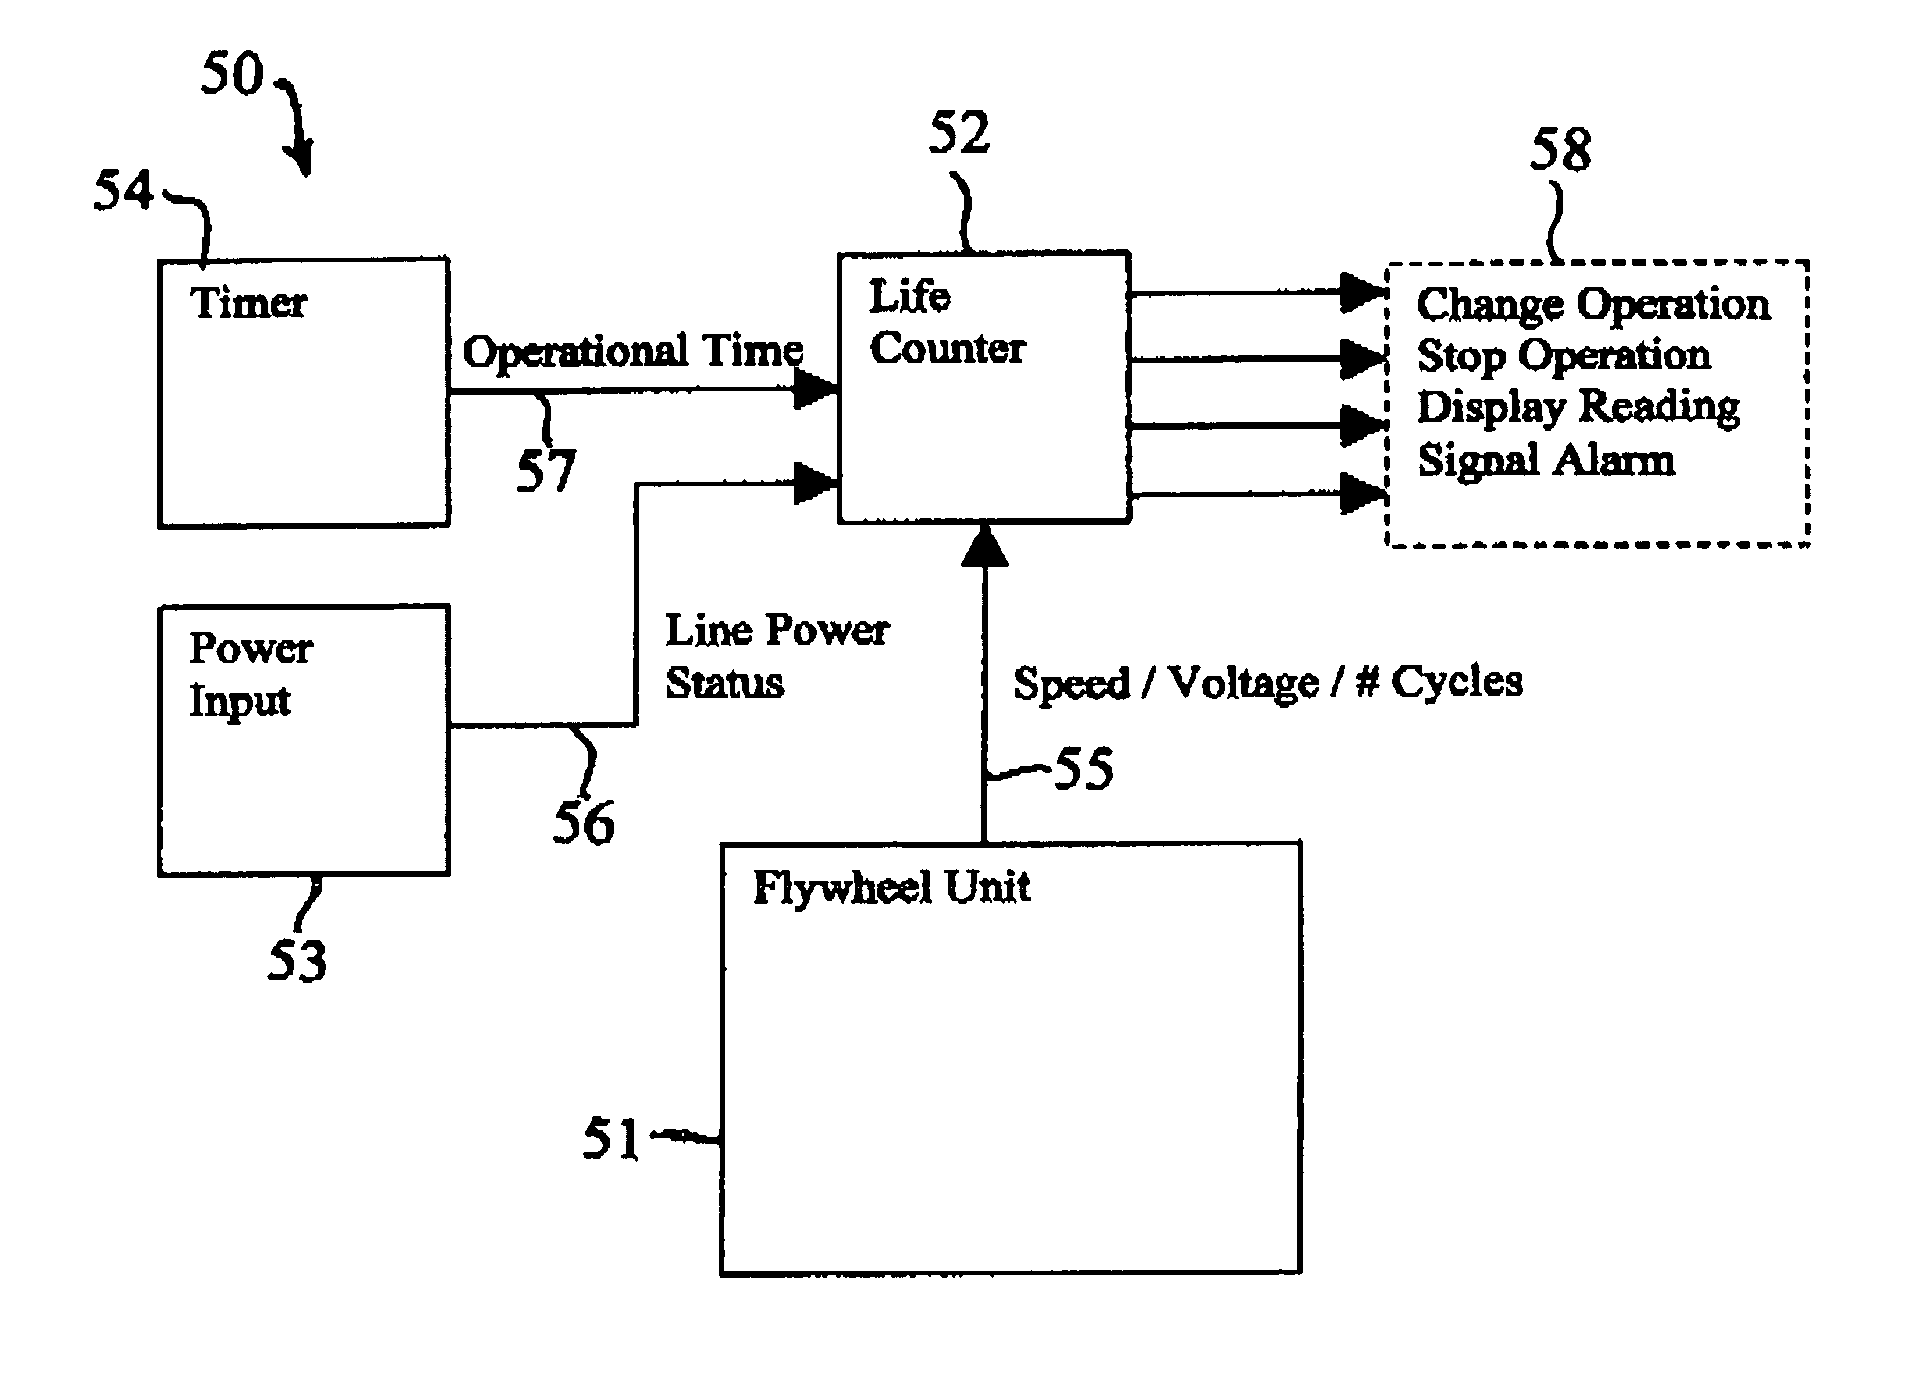 Life counter for flywheel energy storage systems